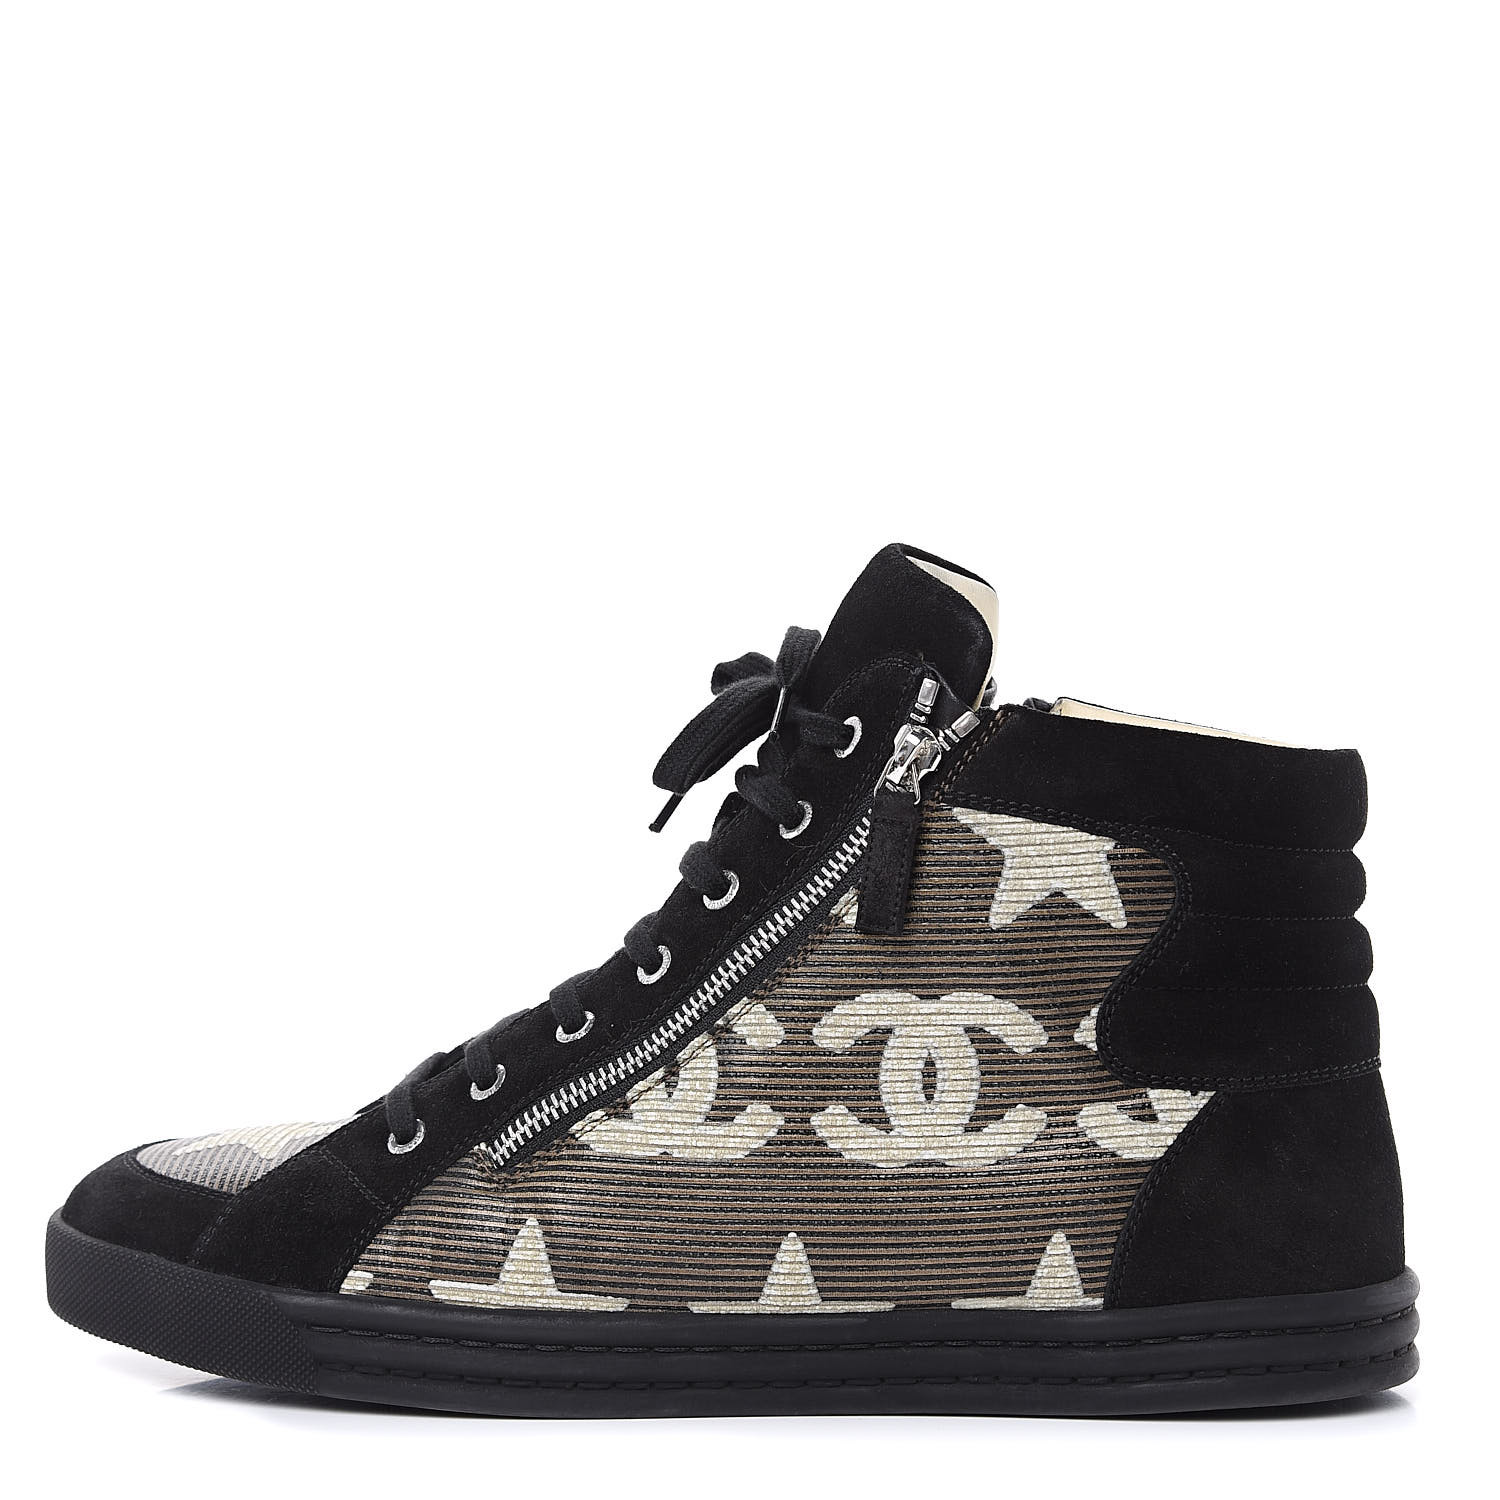 black and gold mens high top sneakers